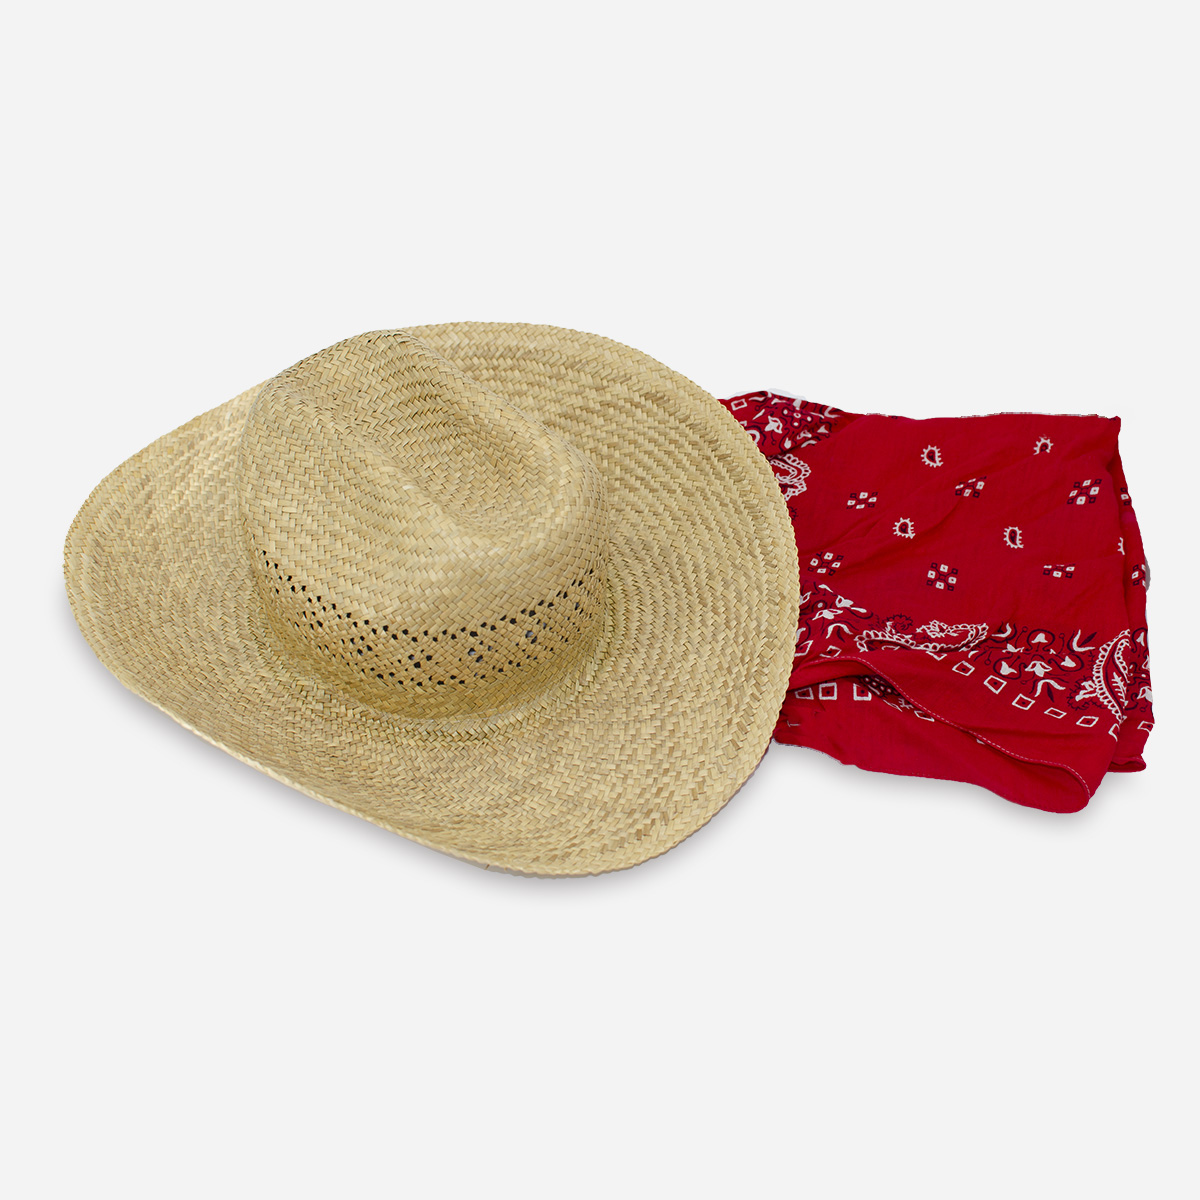 Cowboy hat with red bandana